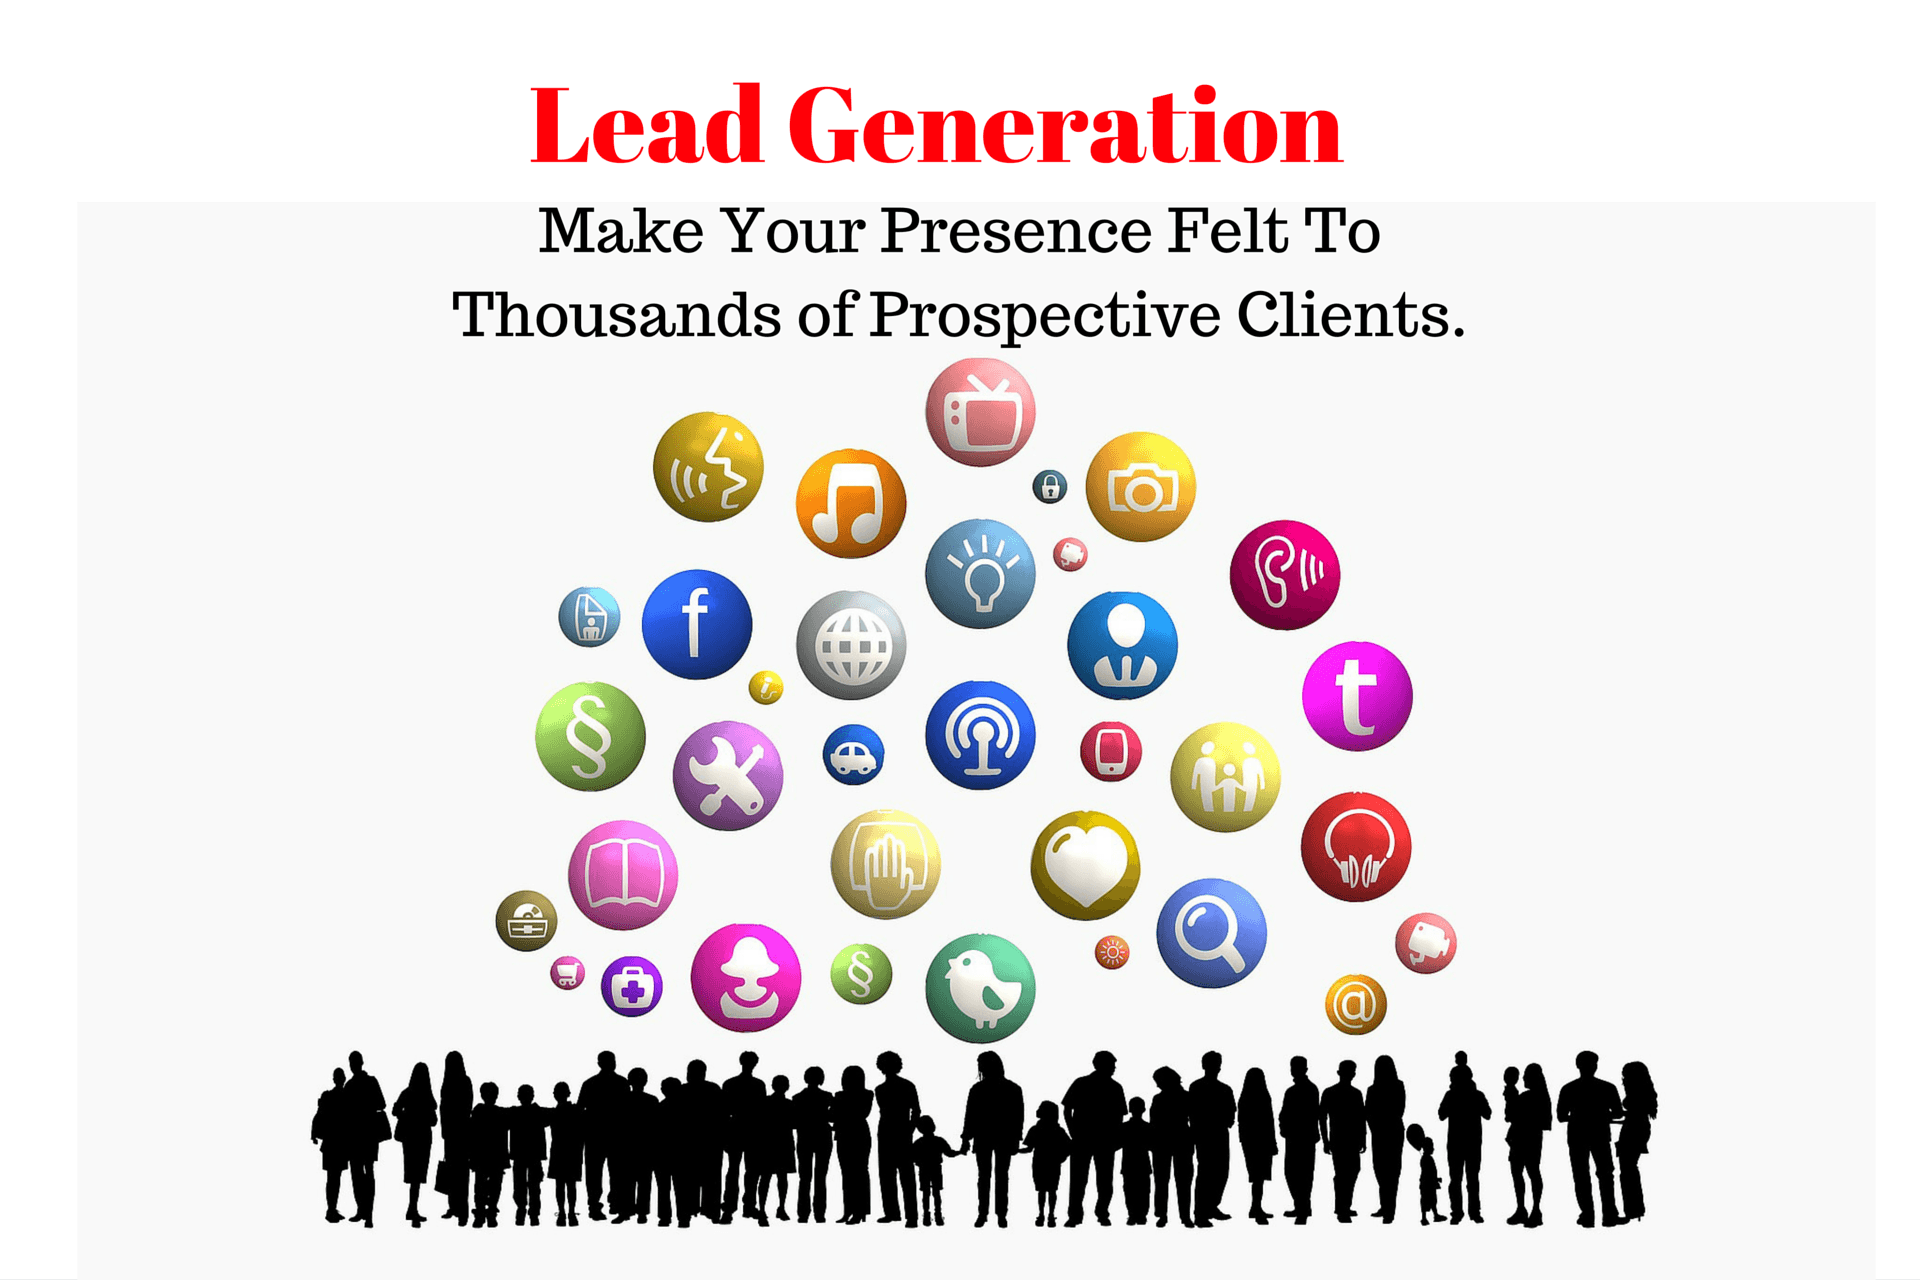 Lead Generation Services - More Business Leads